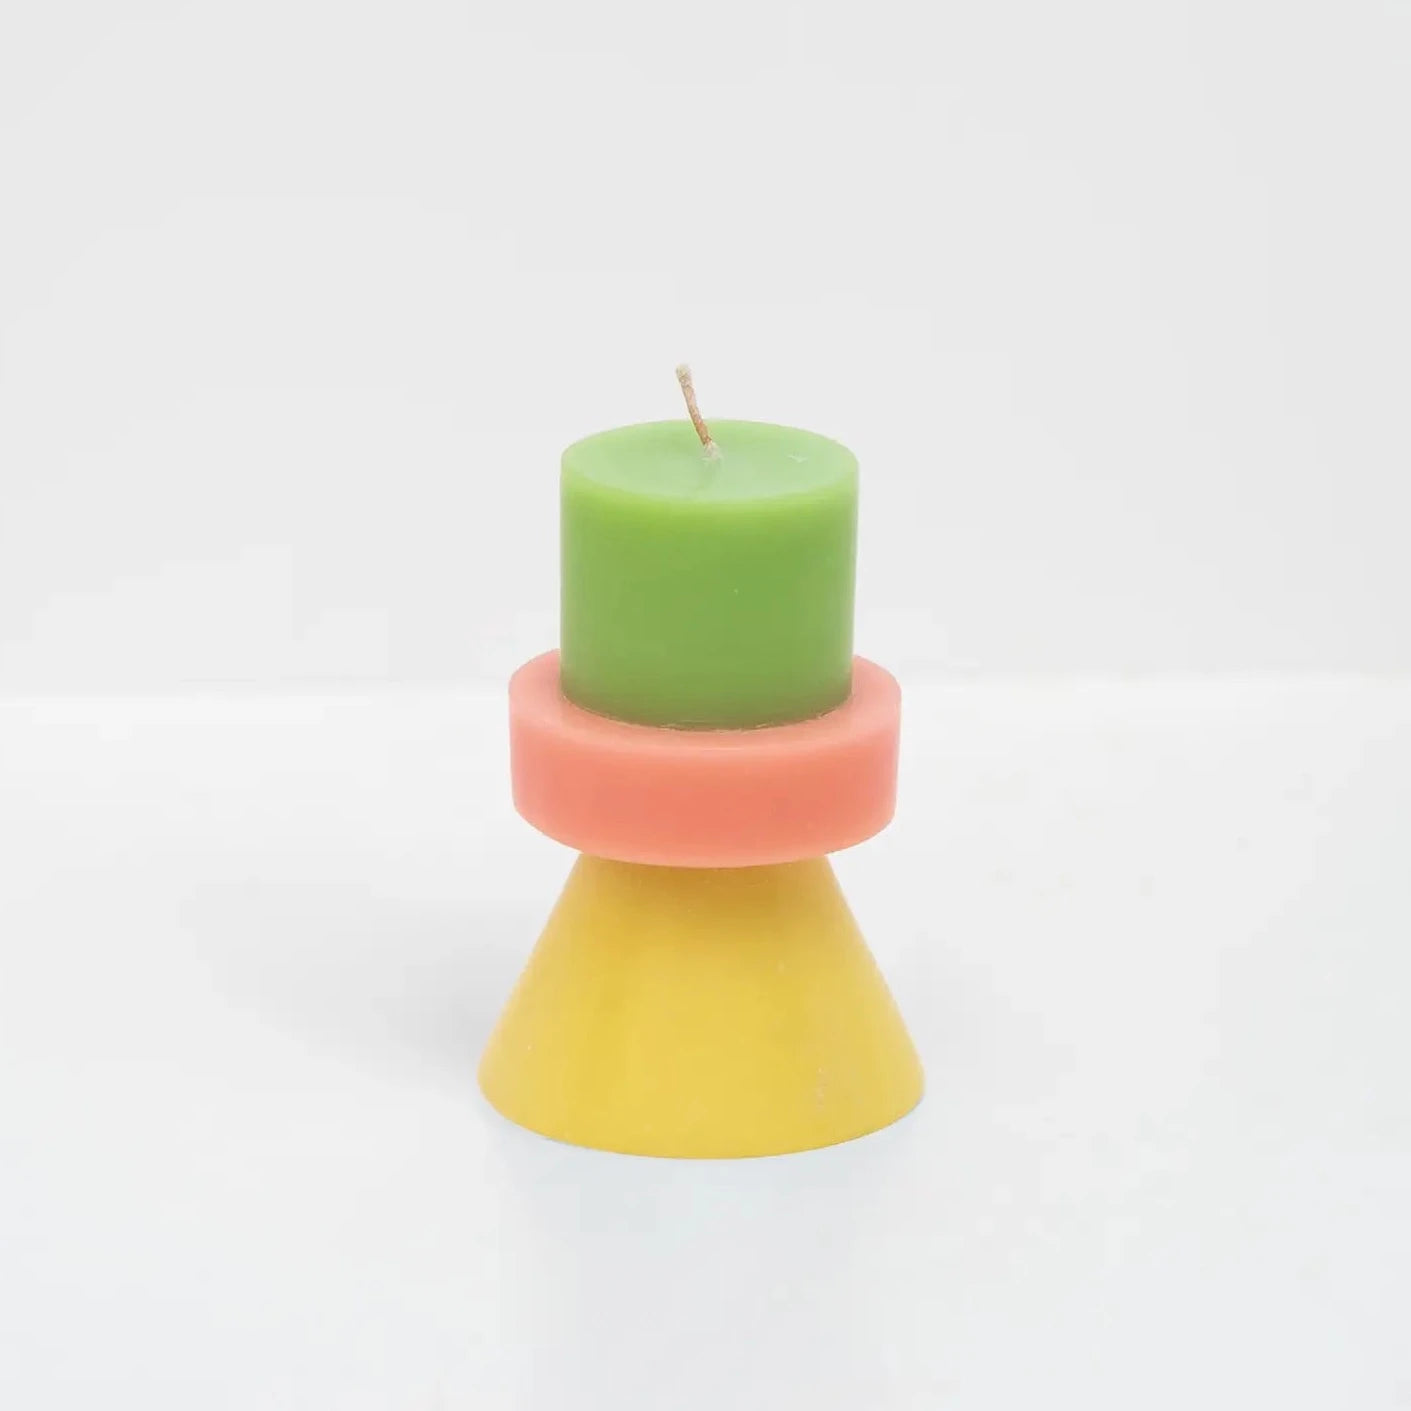 Stack Candle - lime green / coral / yellow